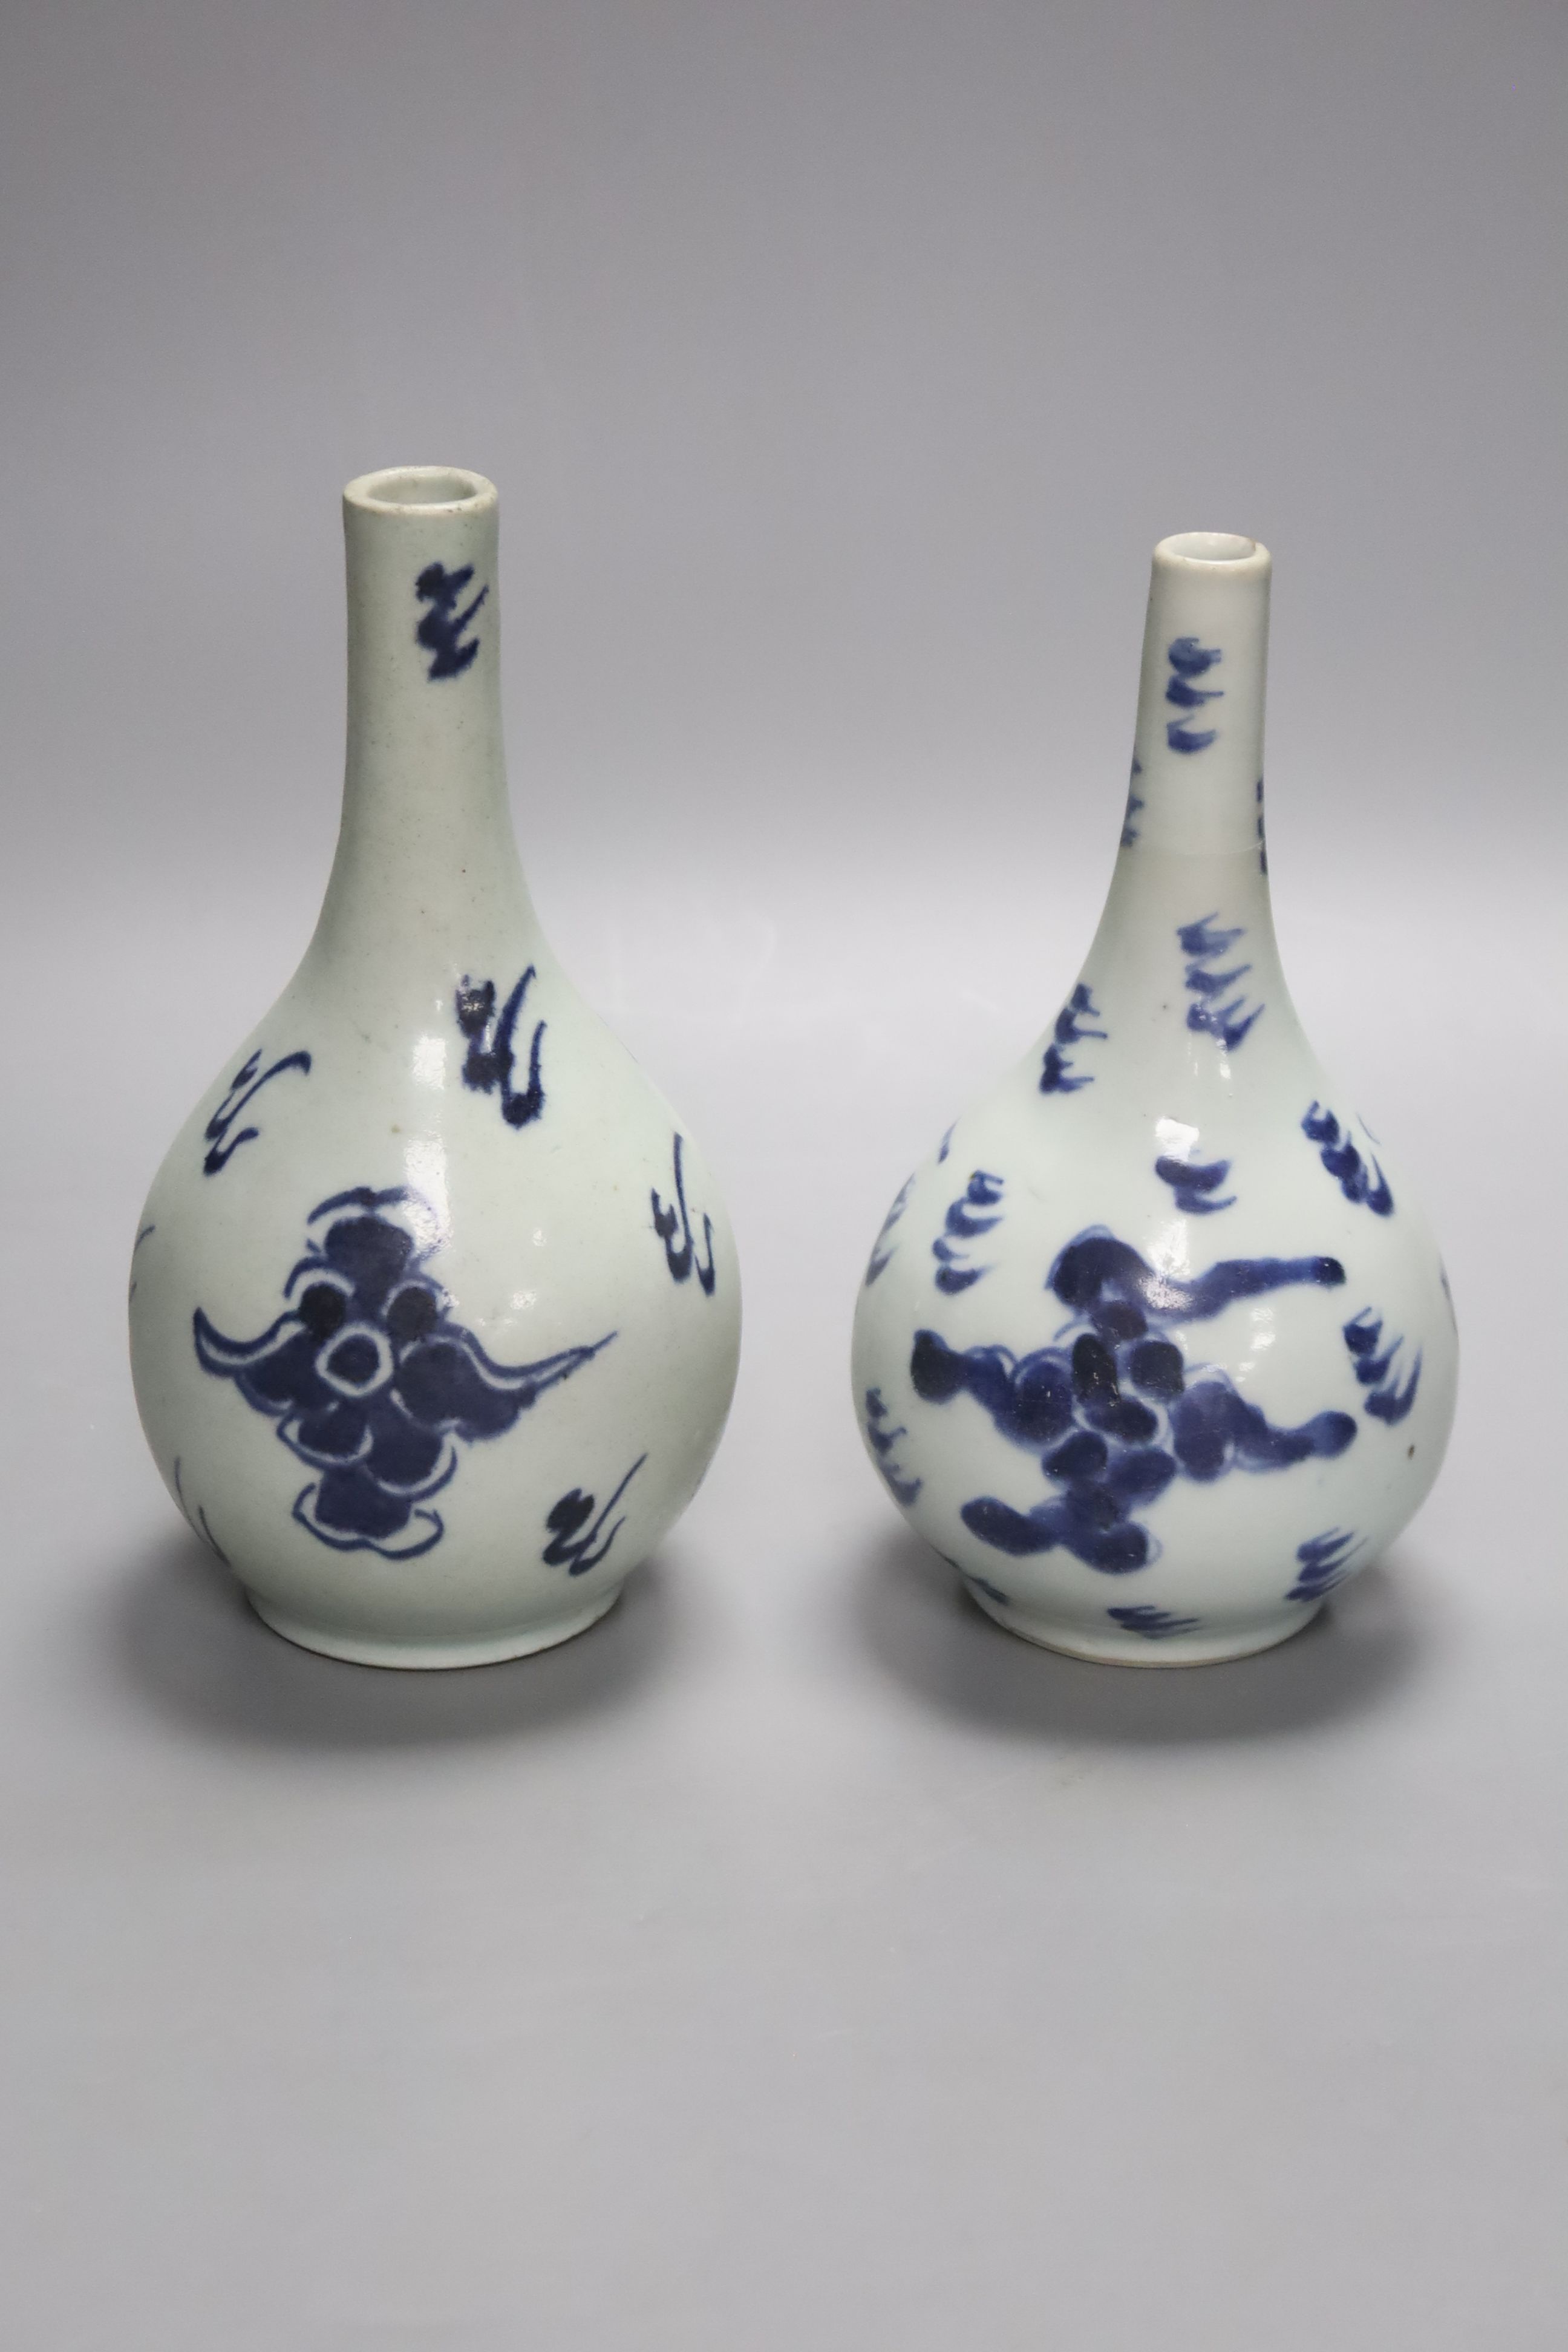 A pair of Chinese bottle vases, late 18th century, 18cm high